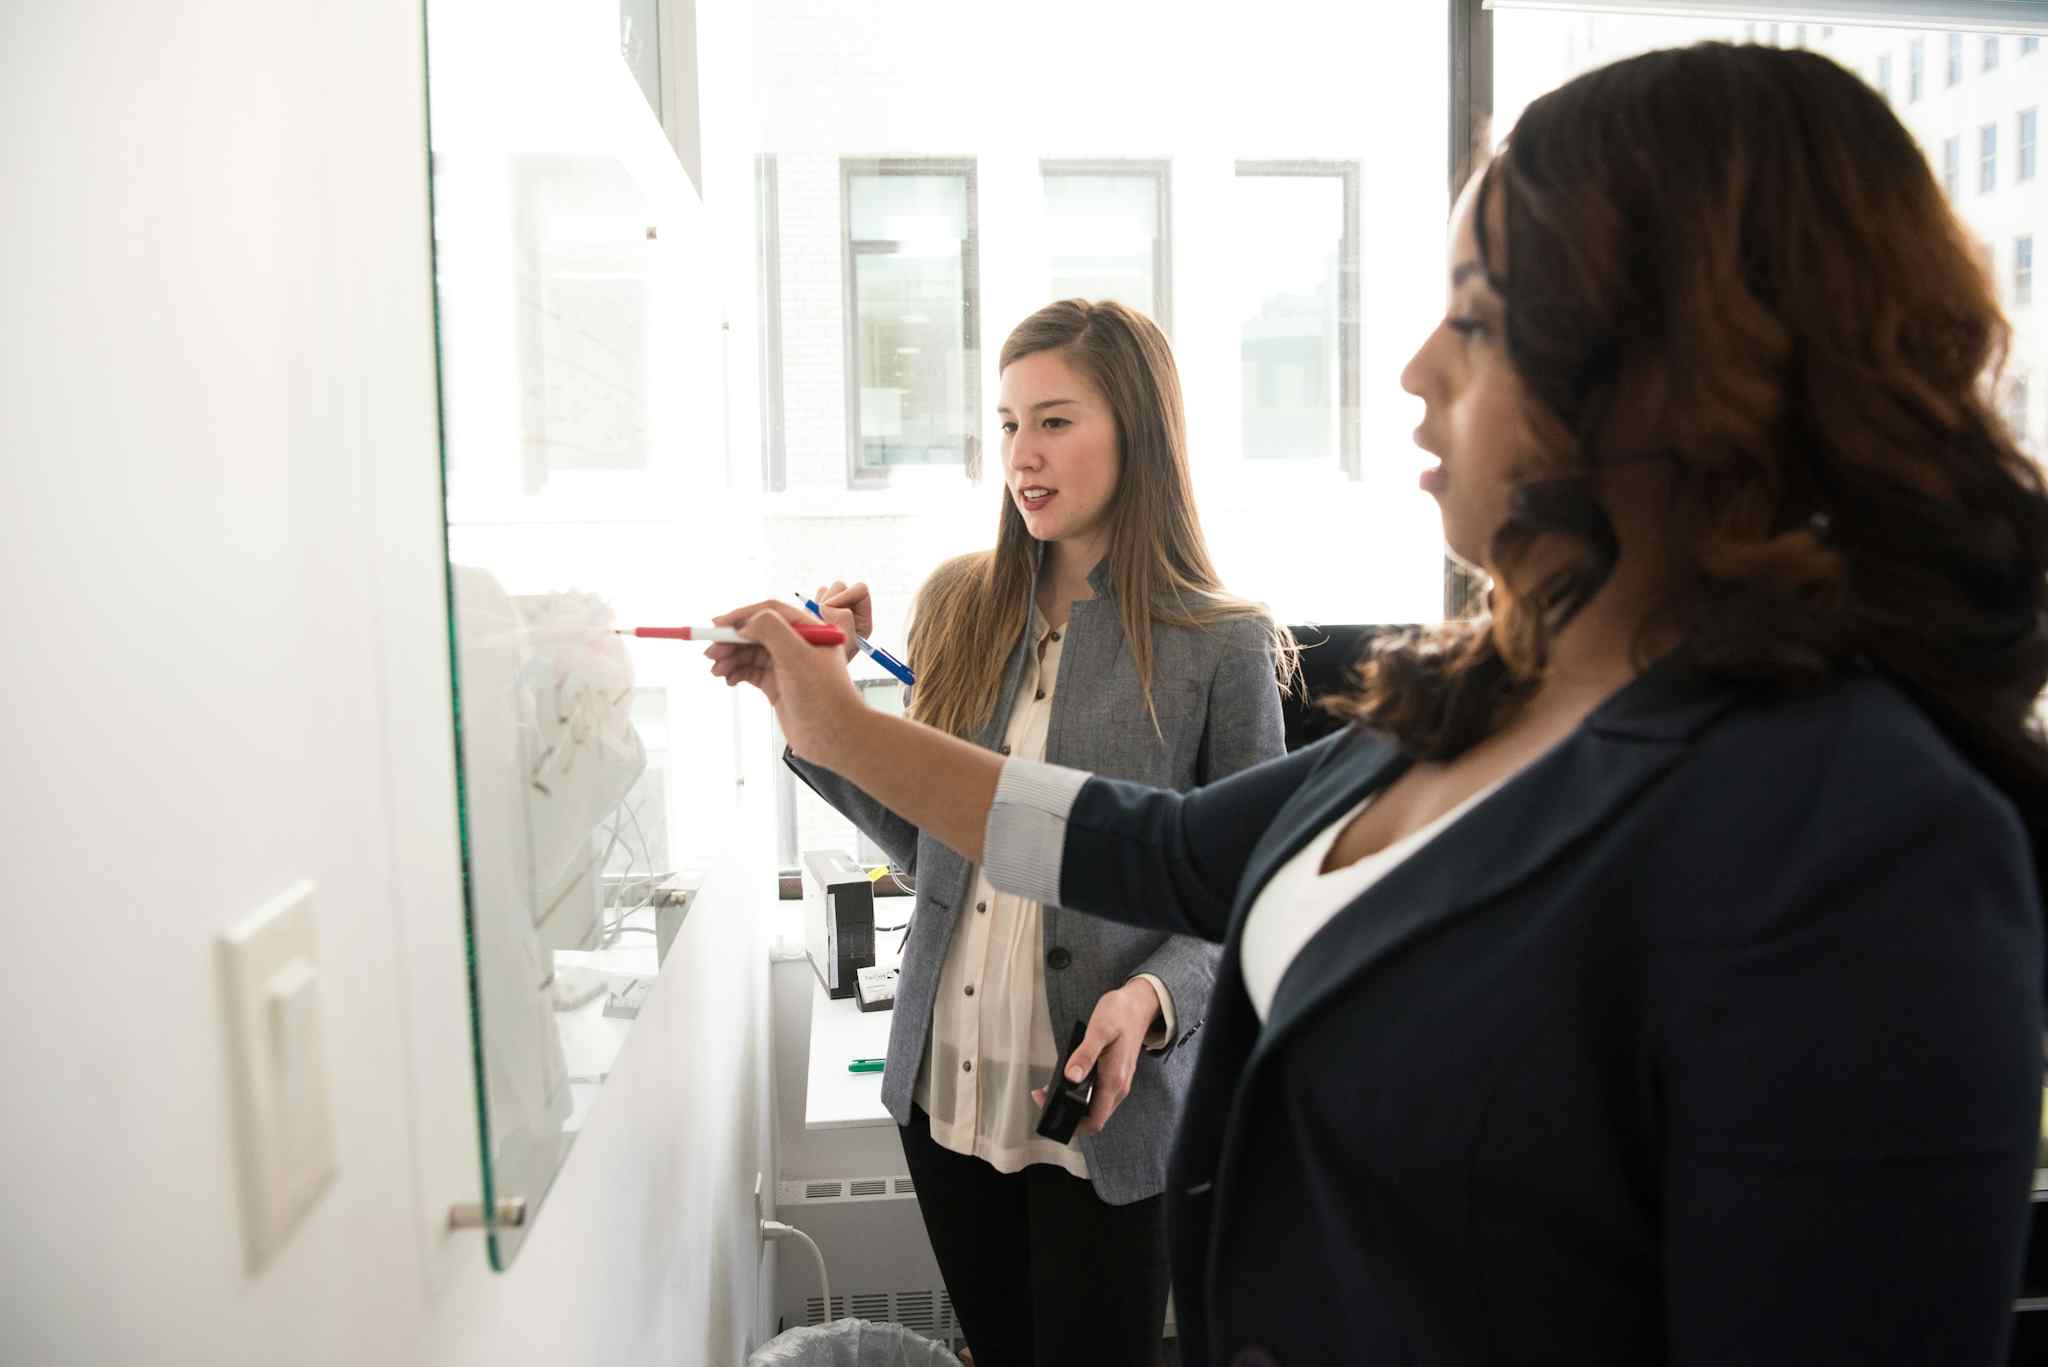 A young Black woman and a young white woman collaborate at a whiteboard.